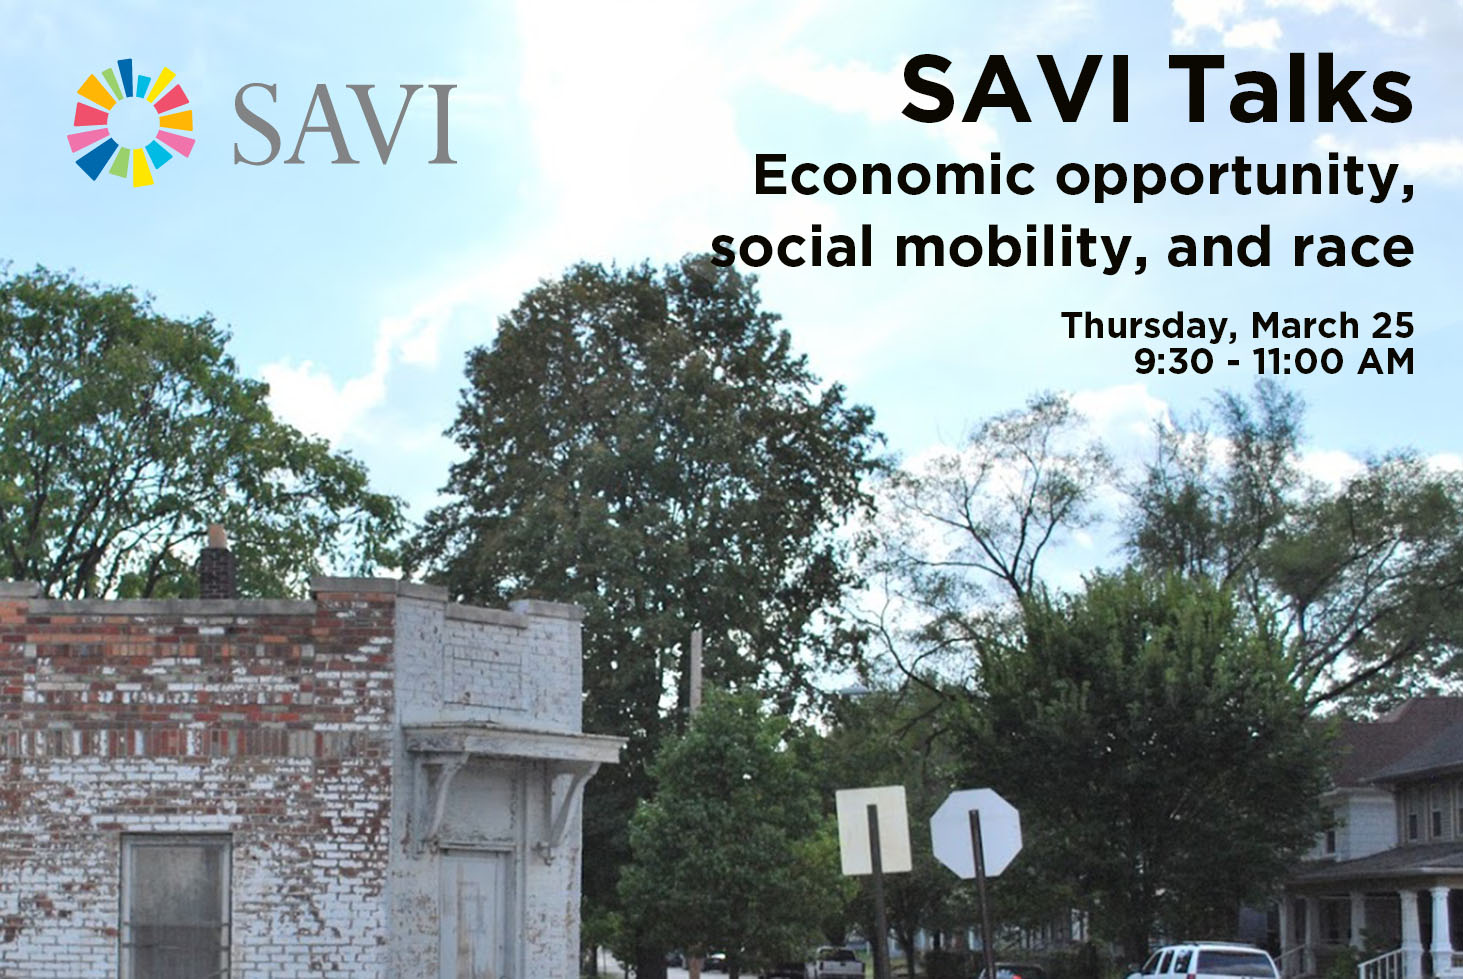 SAVI Talks Equity in Economic Opportunity, Social Mobility, and Race